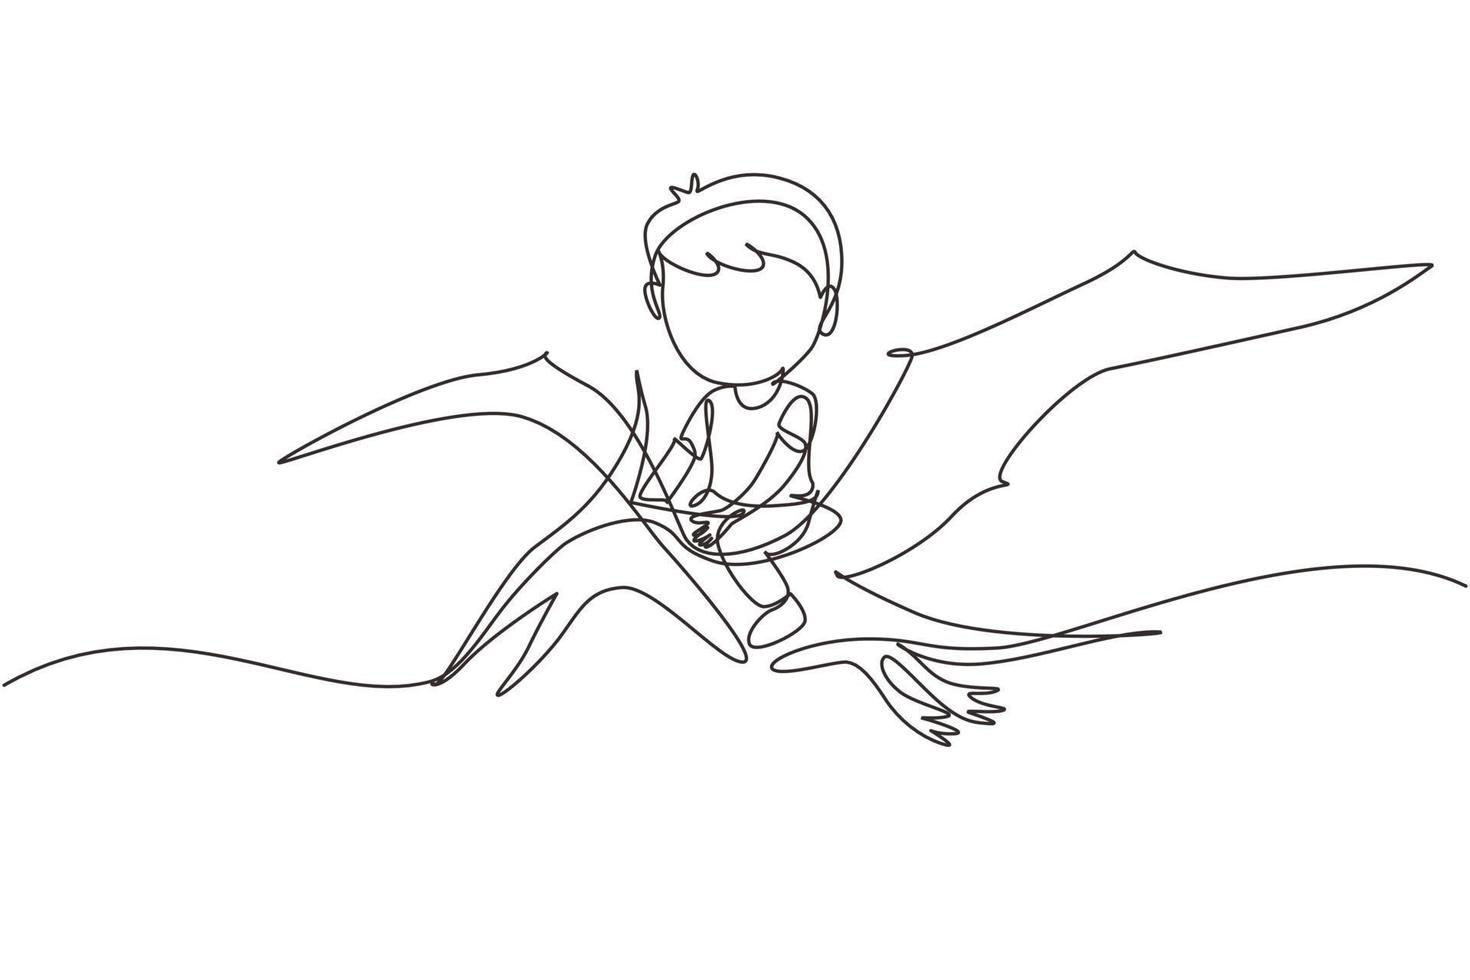 Single continuous line drawing boy riding flying dinosaur. Pterodactyl ride with young kid sitting on back of dinosaur and flying high in sky. Dynamic one line draw graphic design vector illustration